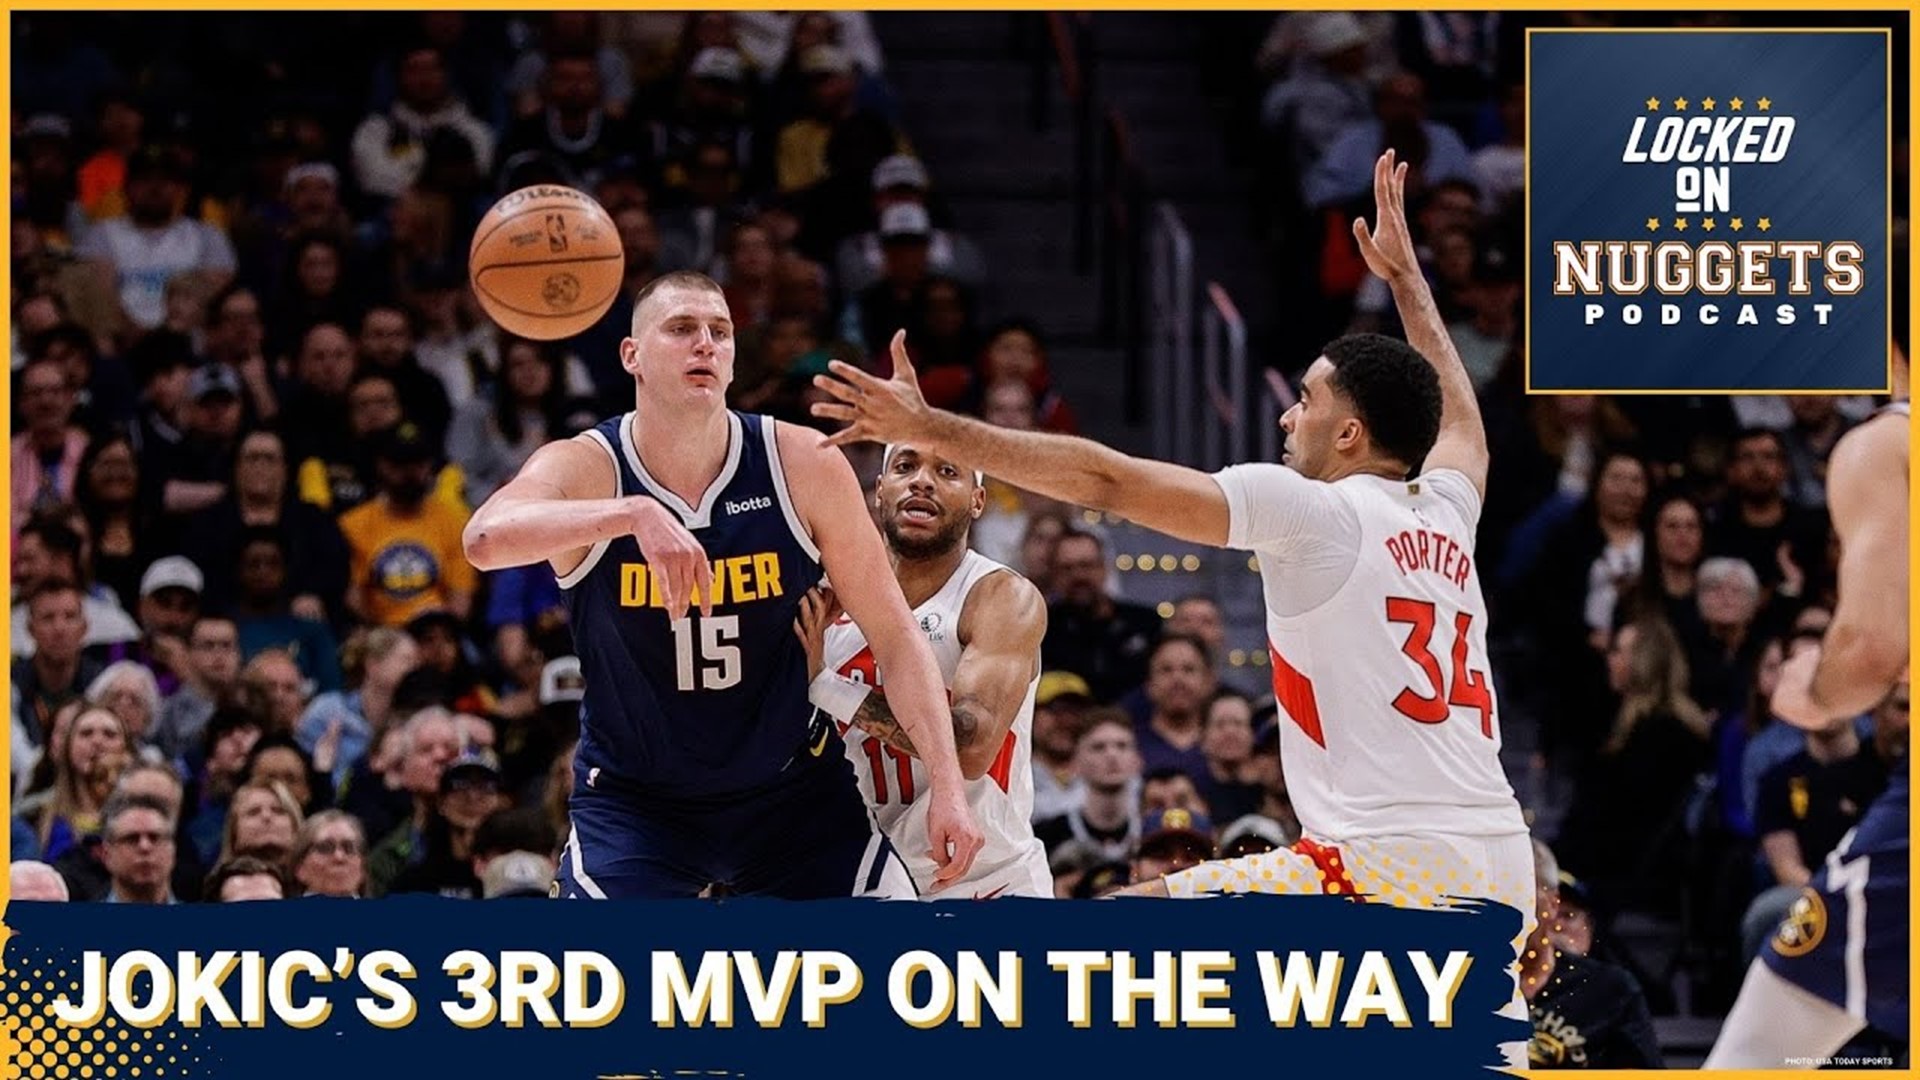 Matt Moore and Adam Mares discuss why Nikola Jokic will likely win his third MVP and what that means for his legacy.